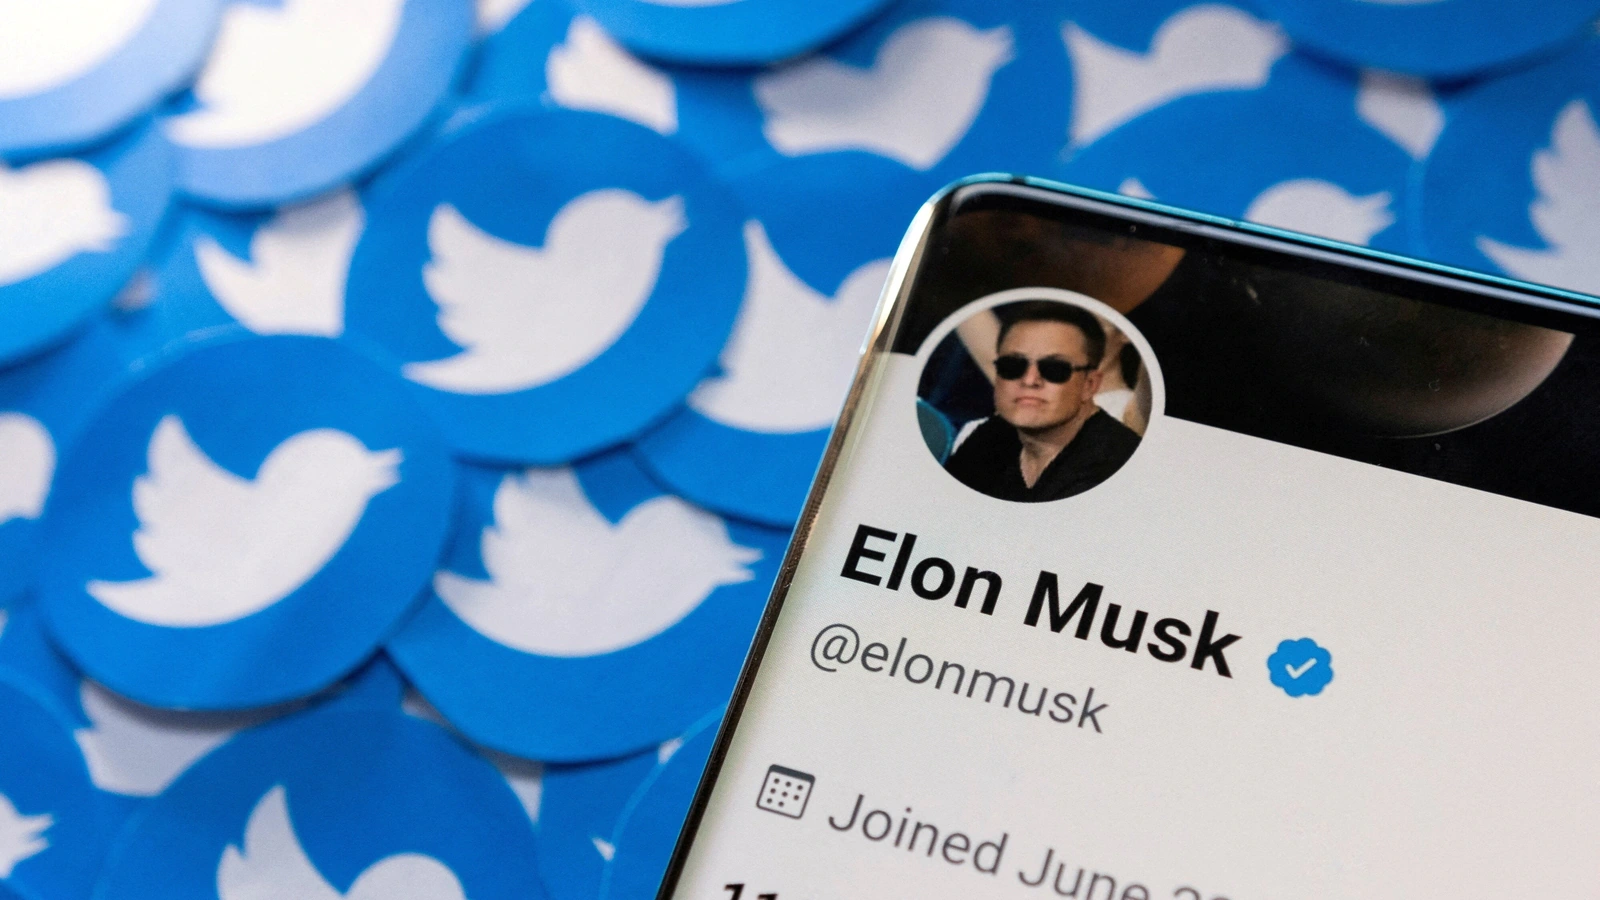 Elon Musk, Twitter CEO Parag Agrawal to reschedule their depositions in legal battle: Report